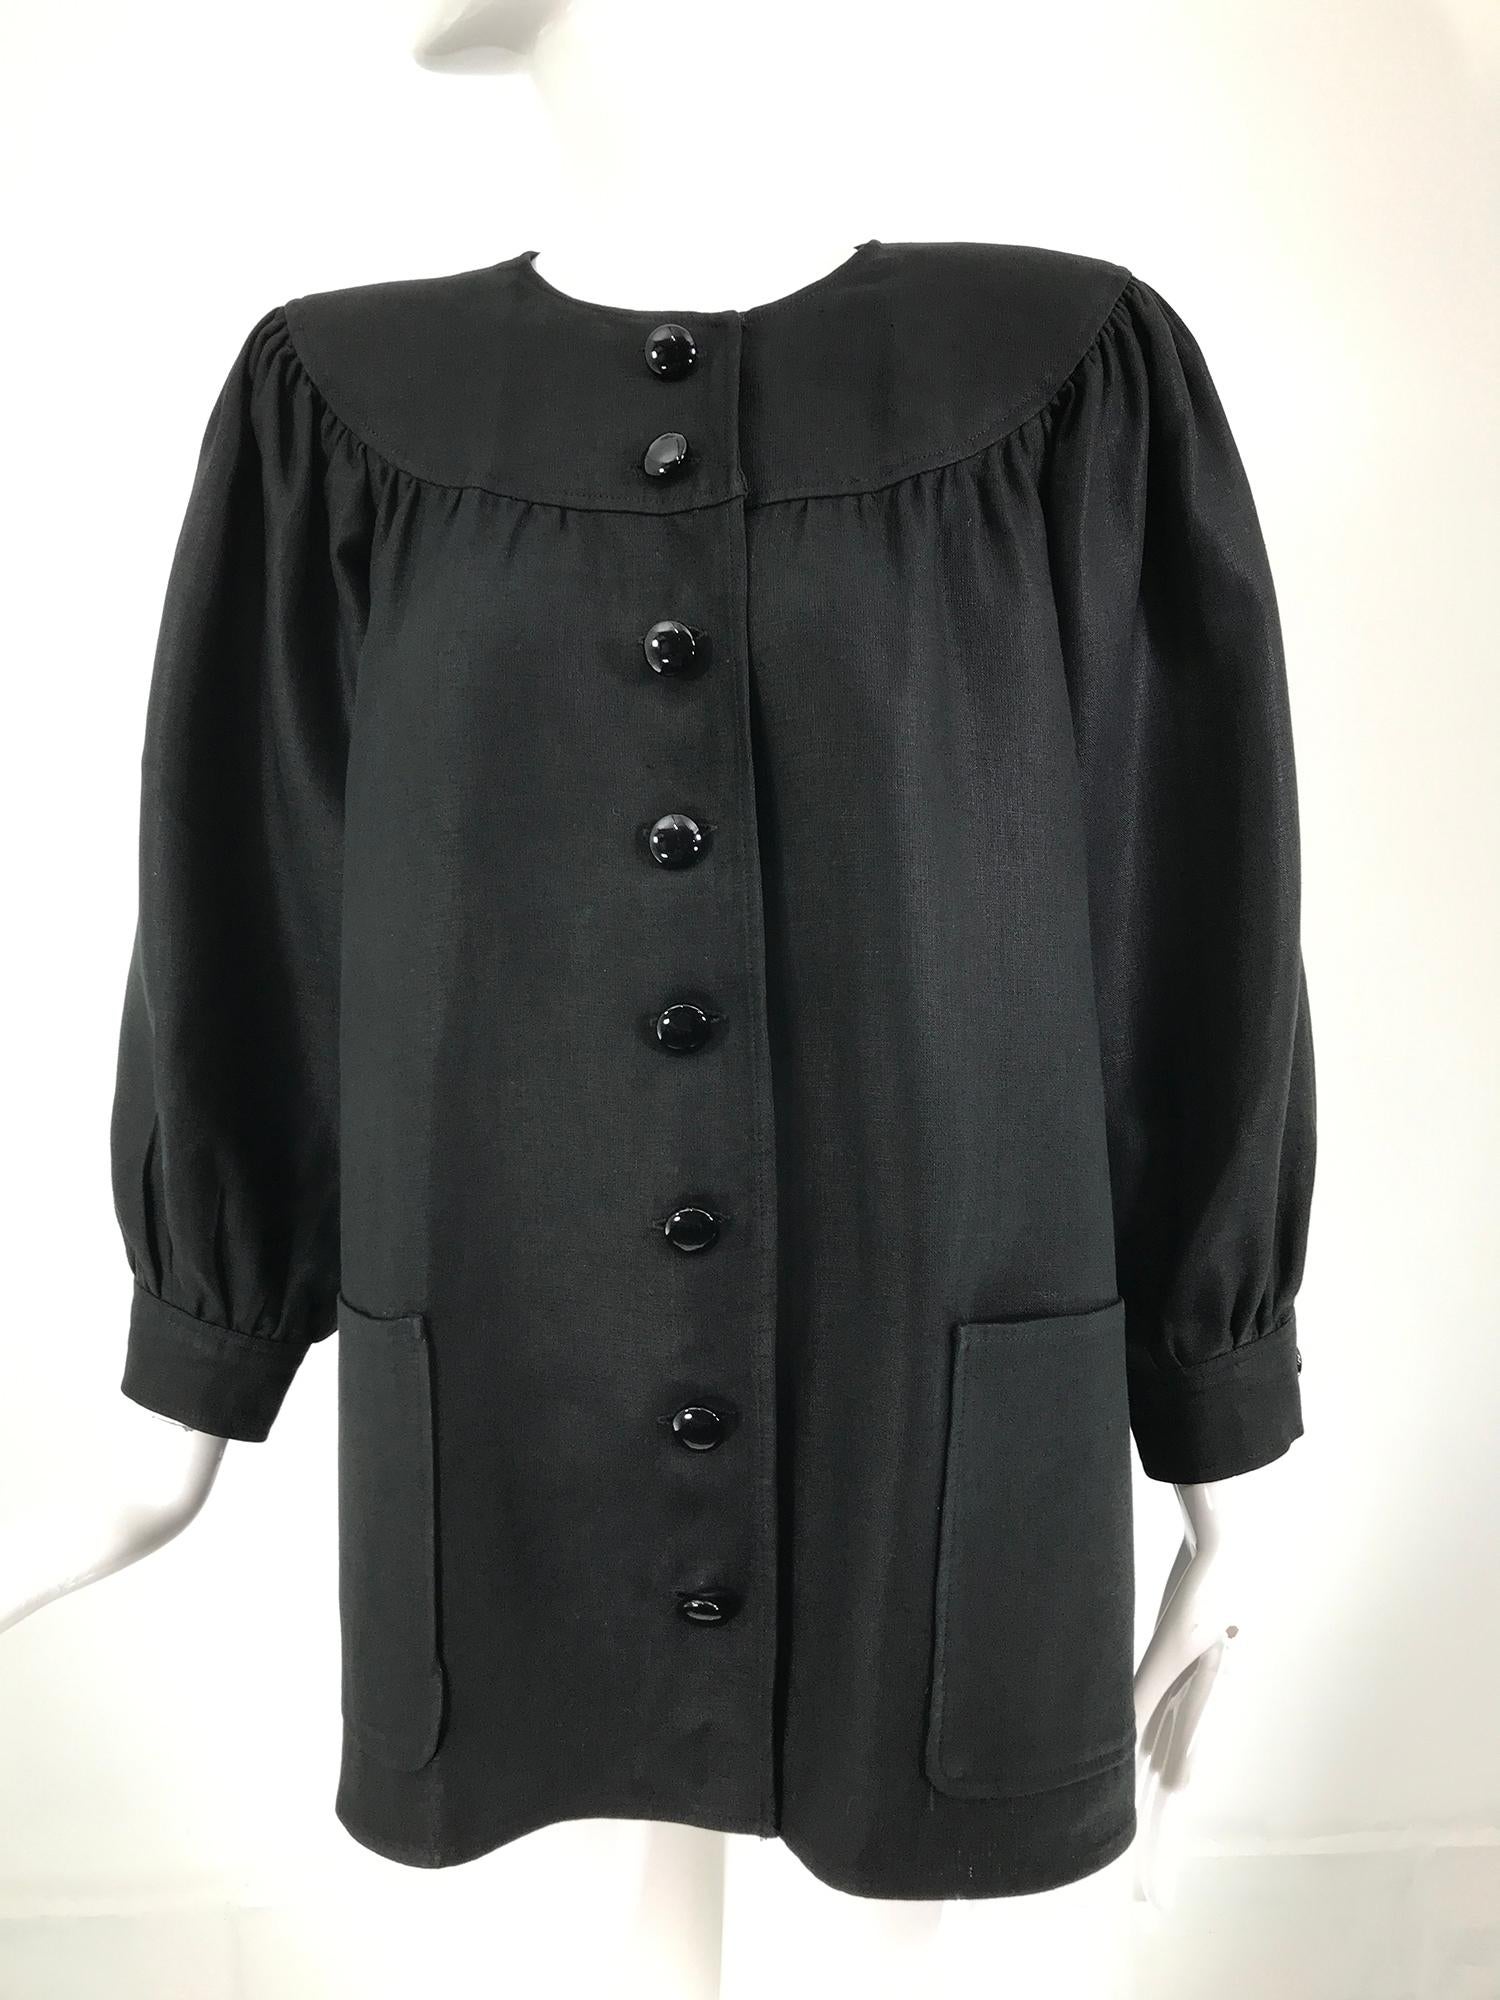 Oscar de la Renta heavy black linen button front, full sleeve jacket with patch pockets from the 1980s. Jewel neck jacket has a deep curved yoke neckline front & back, long full raglan sleeves with button band cuffs, the jacket has padded shoulders.